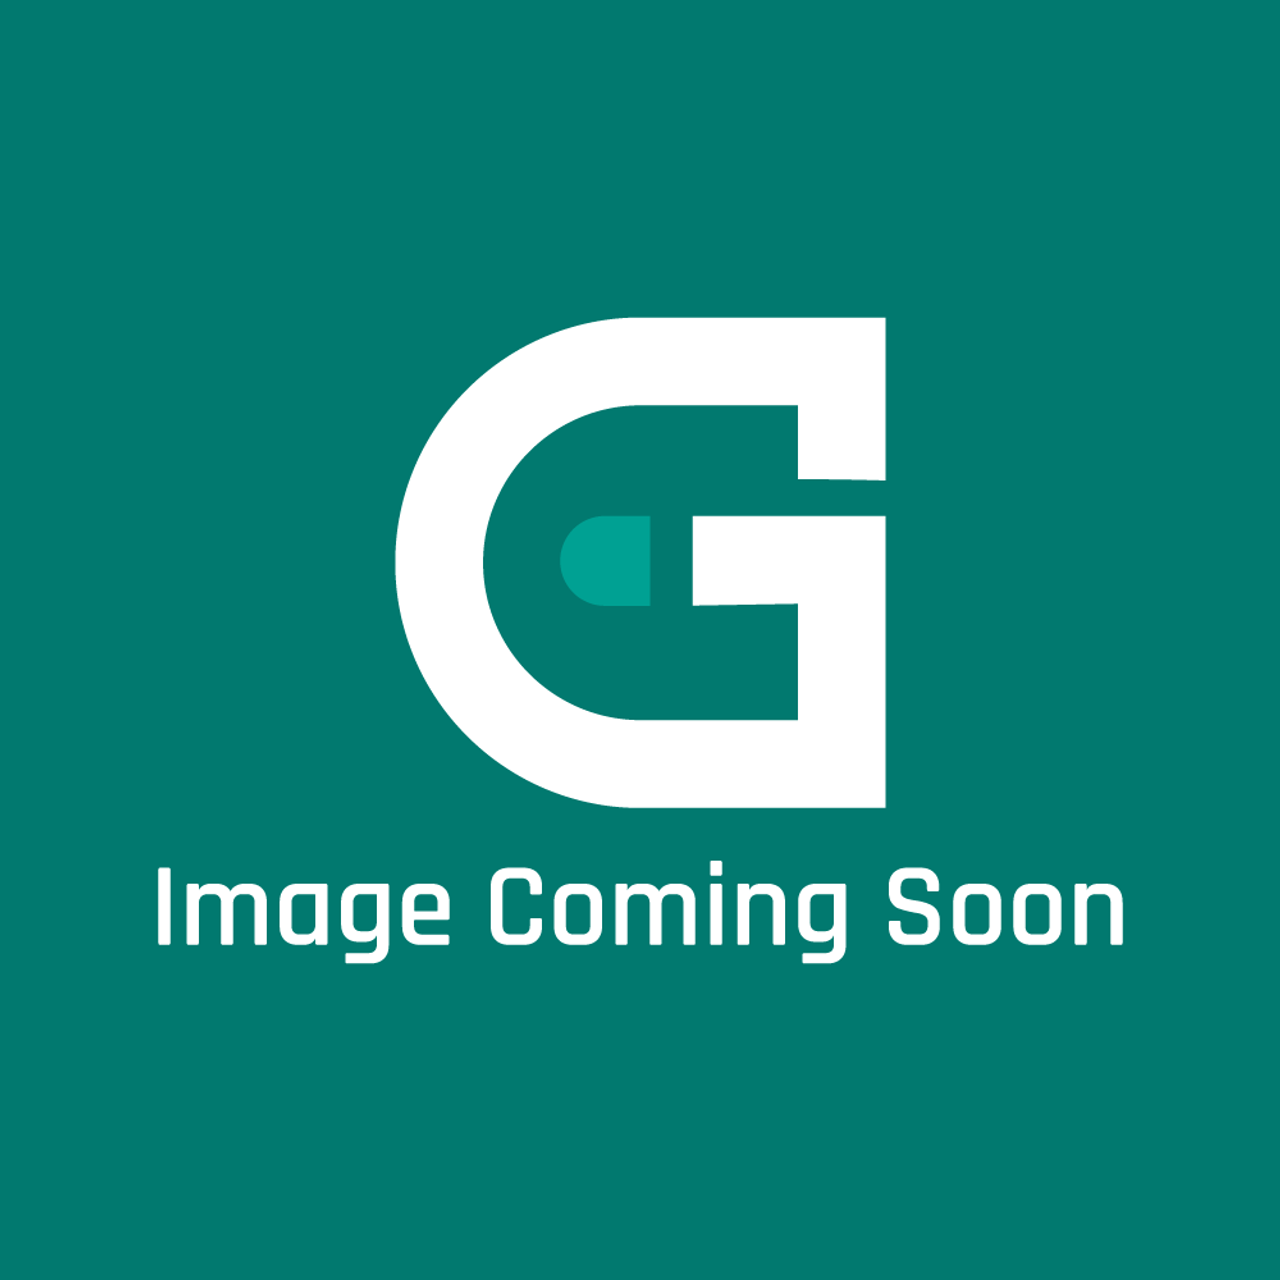 Frigidaire - Electrolux 5304529209 Chimney - Image Coming Soon!